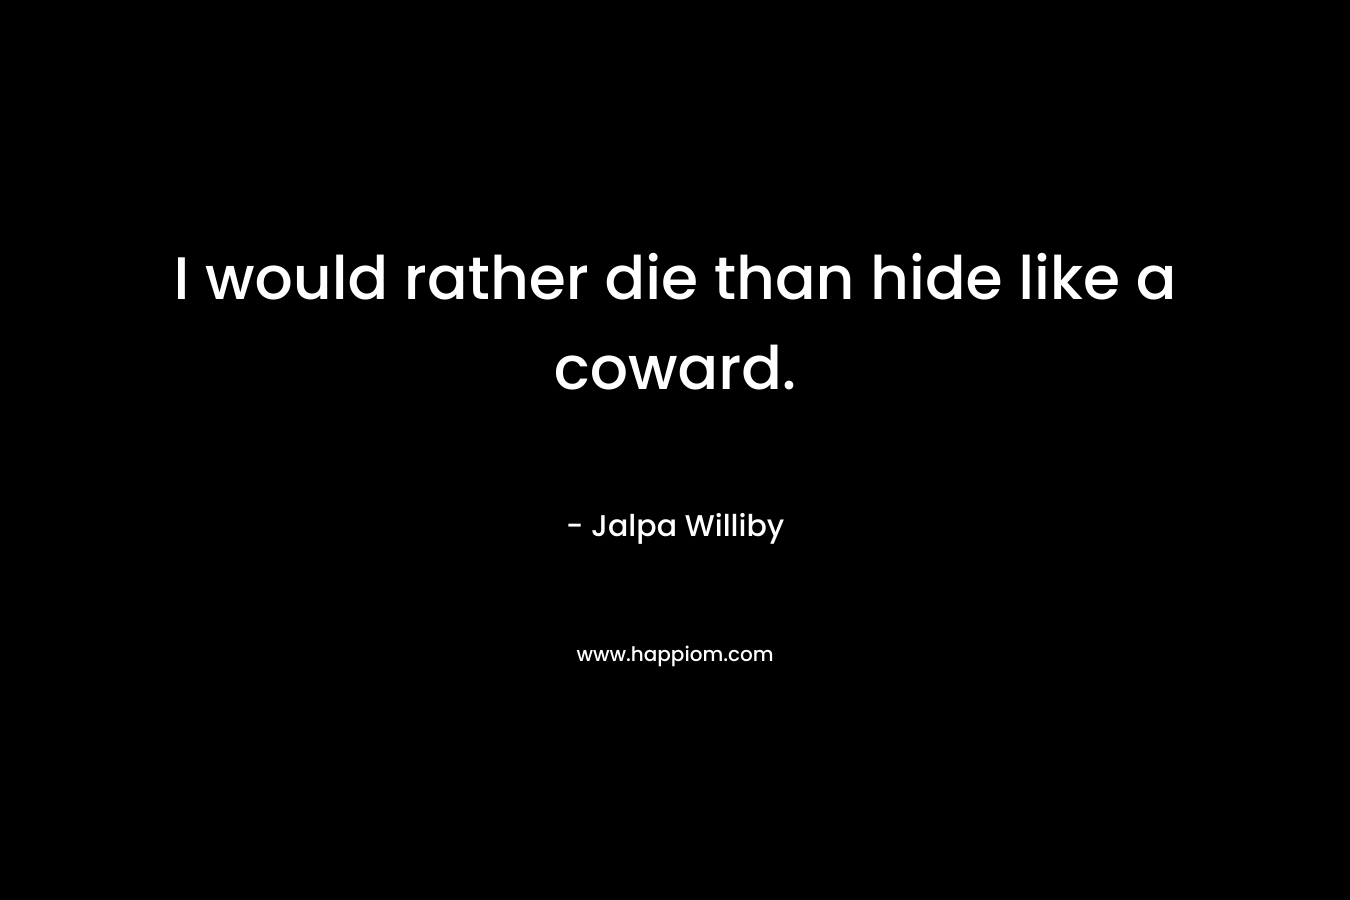 I would rather die than hide like a coward.